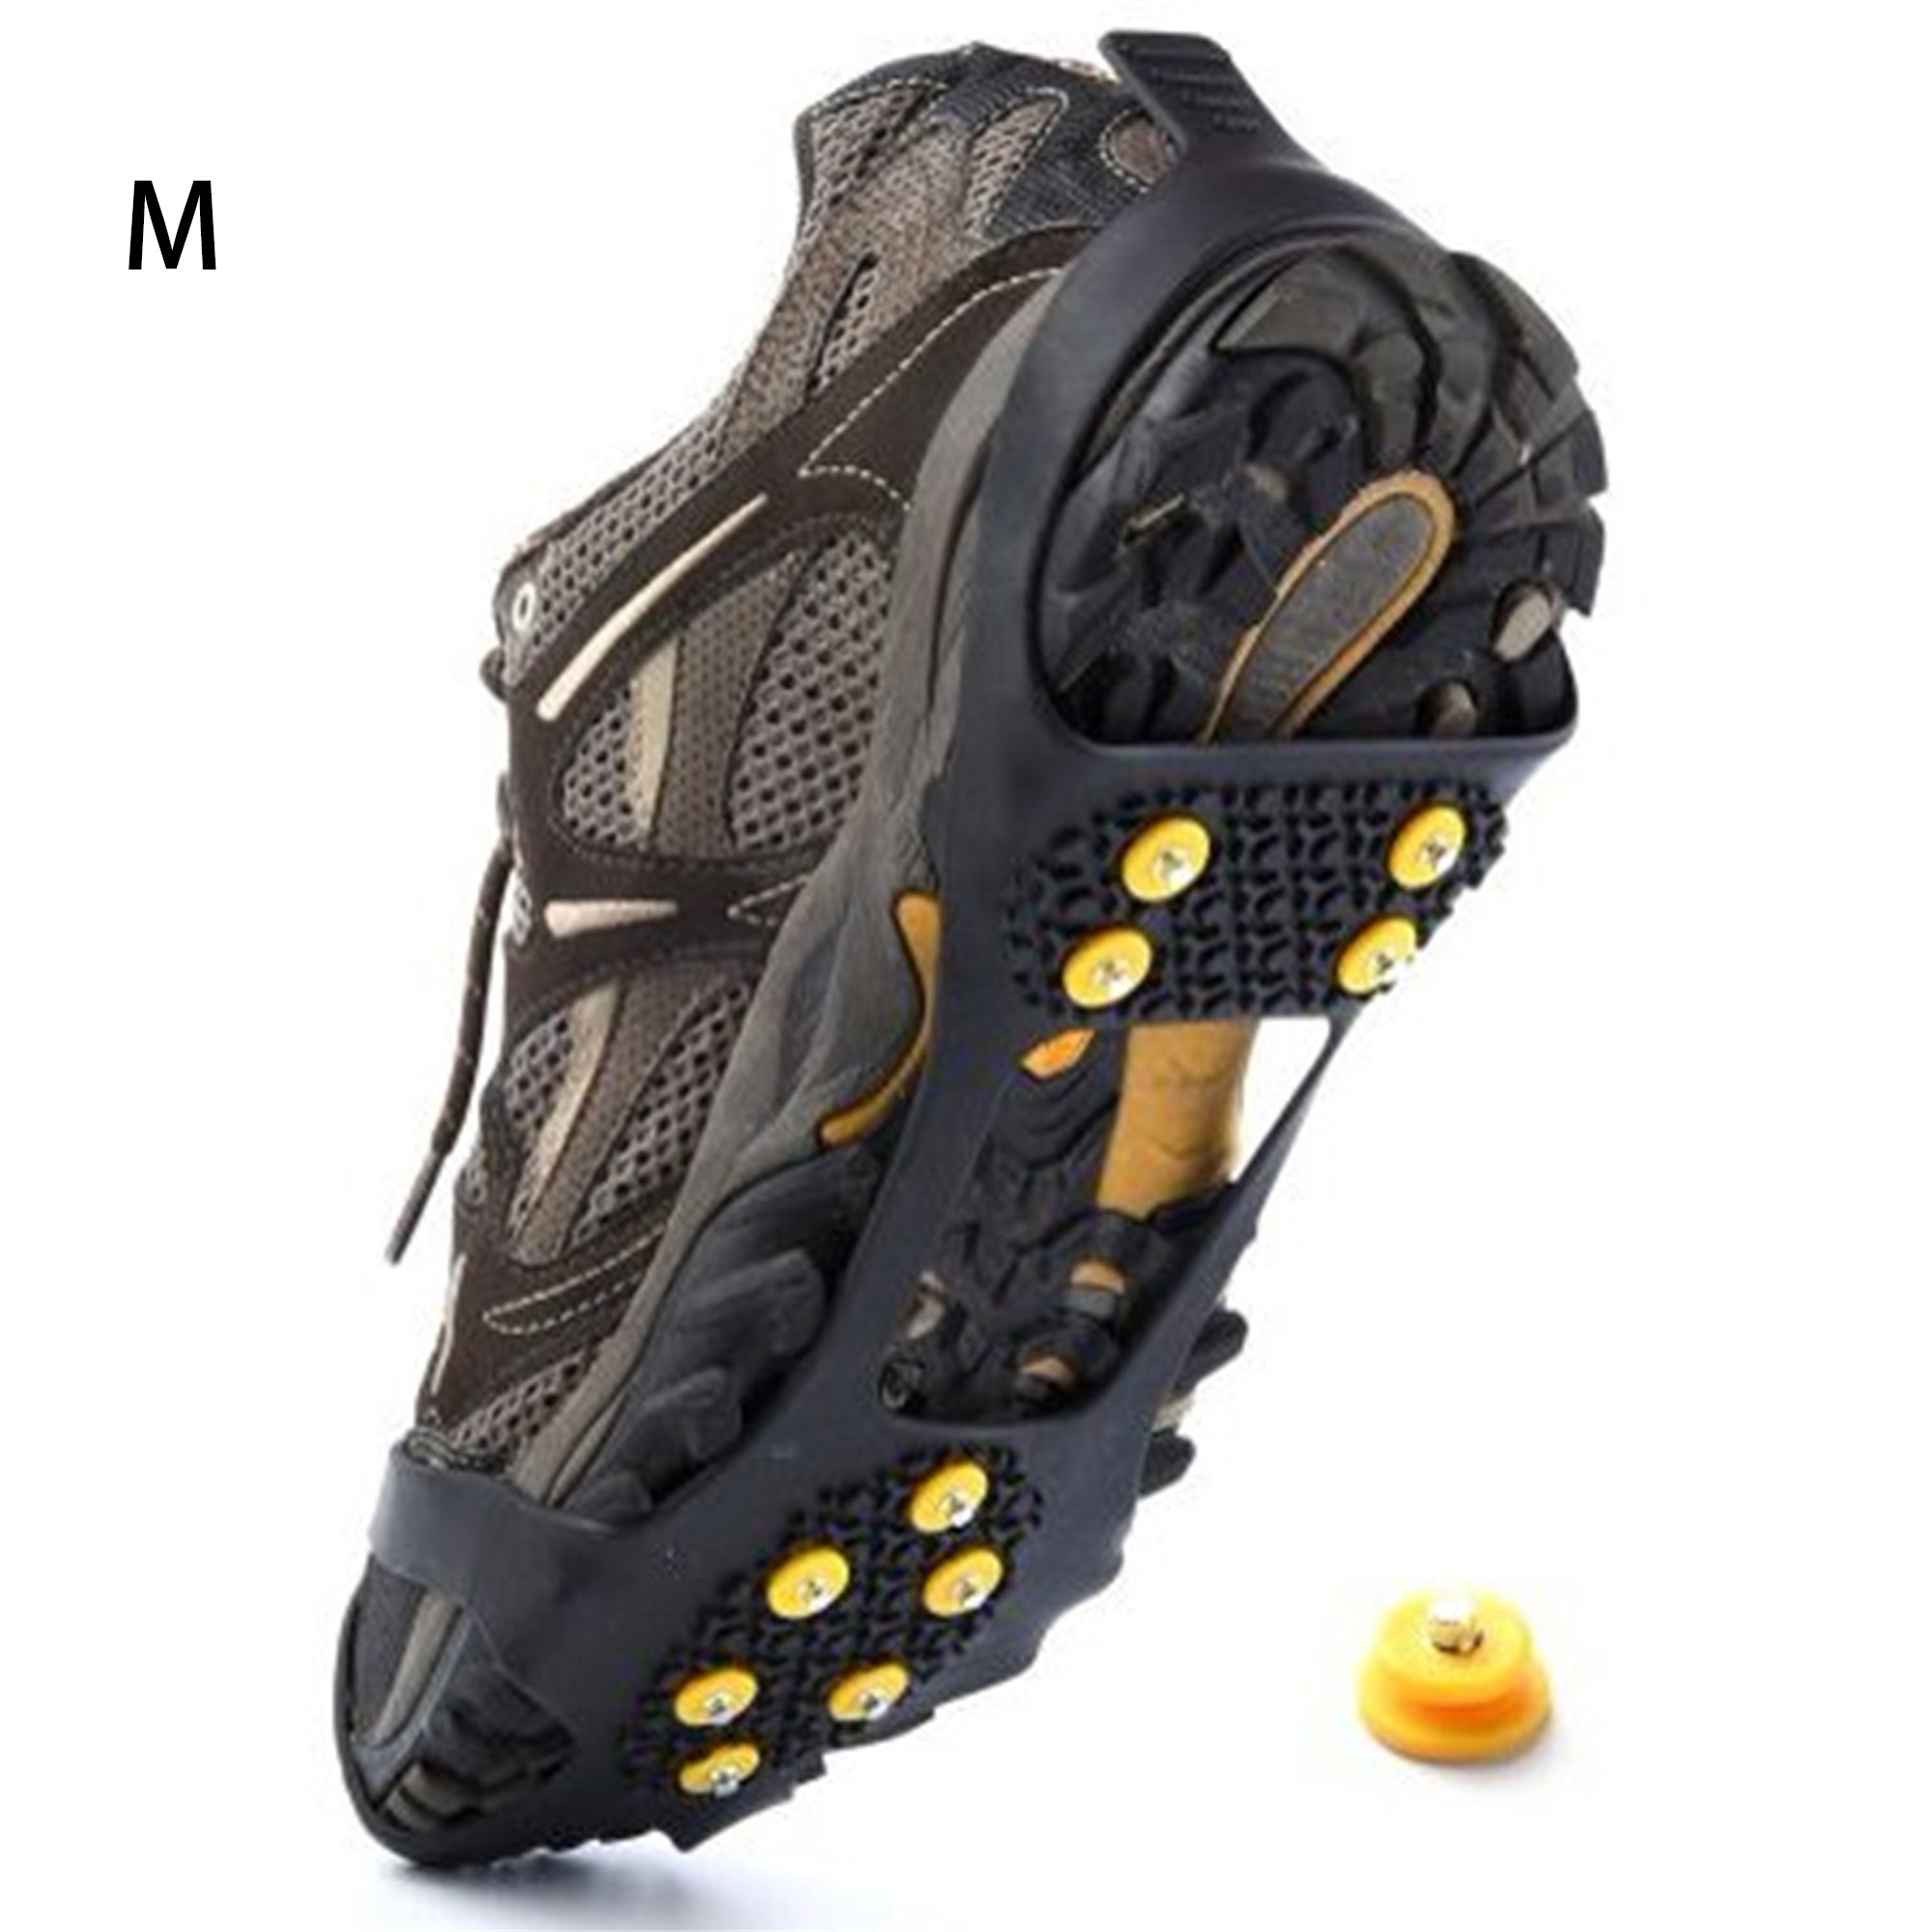 traction cleats for hiking